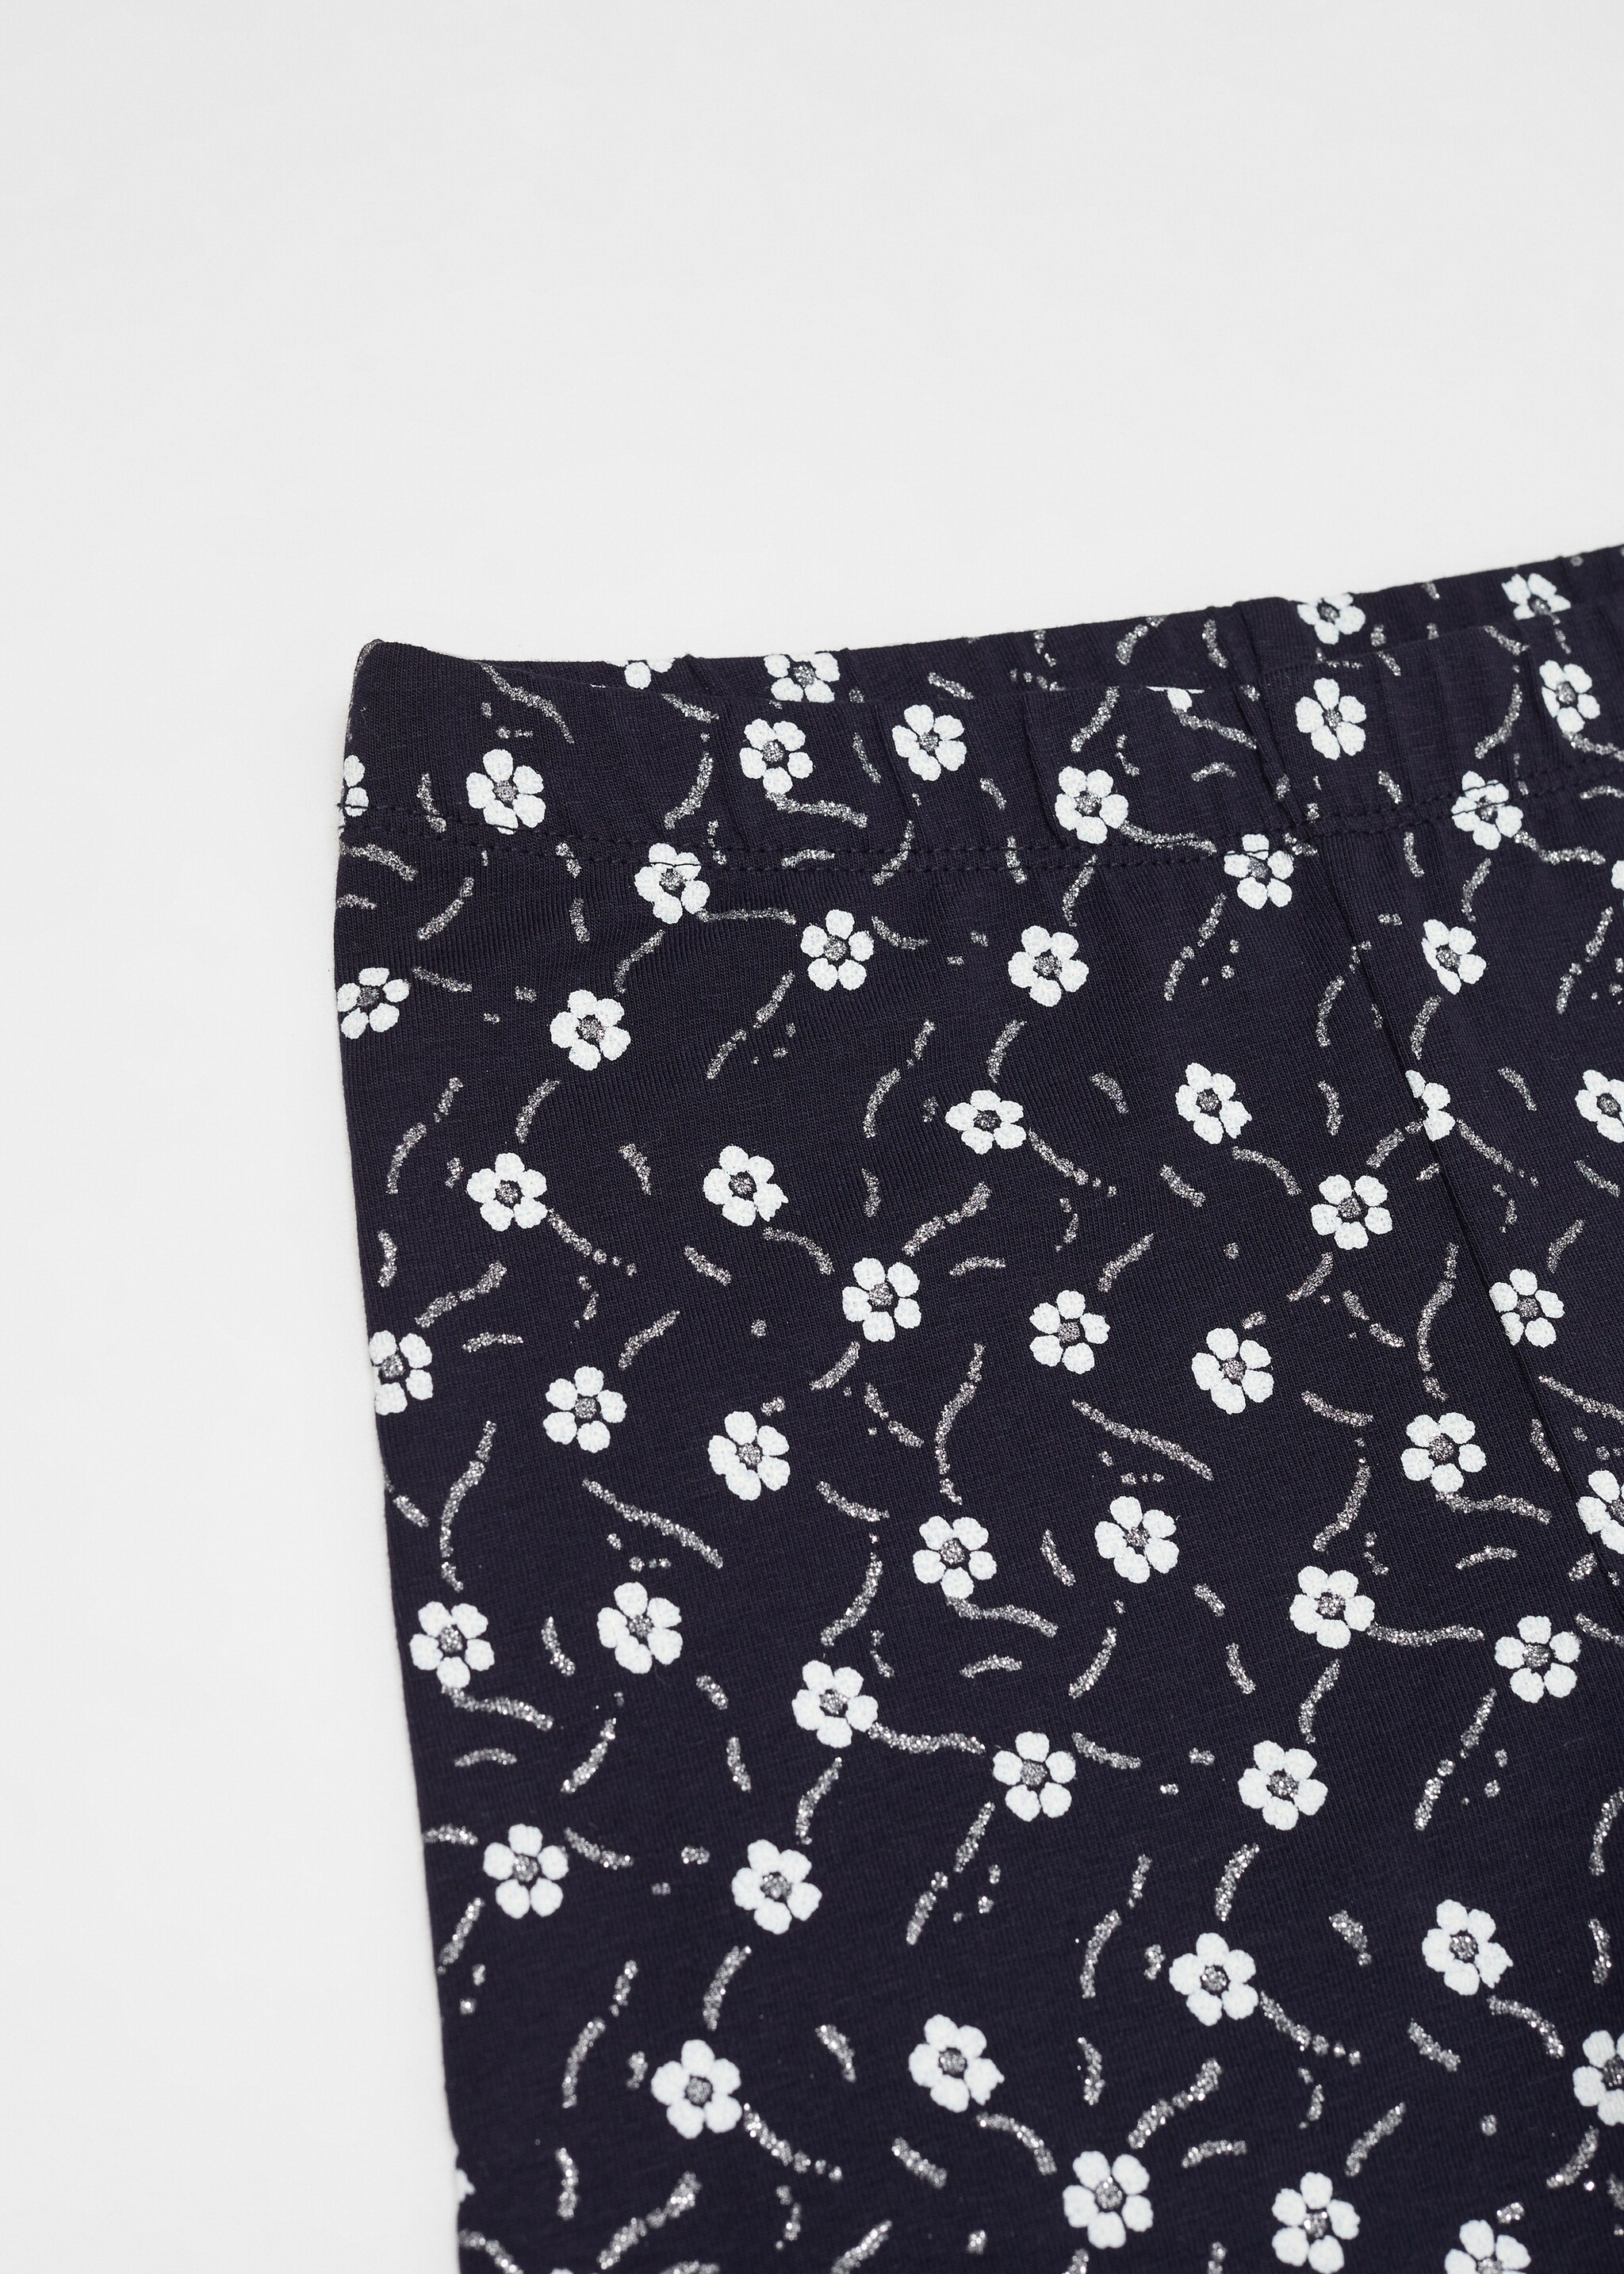 Floral print leggings - Details of the article 8